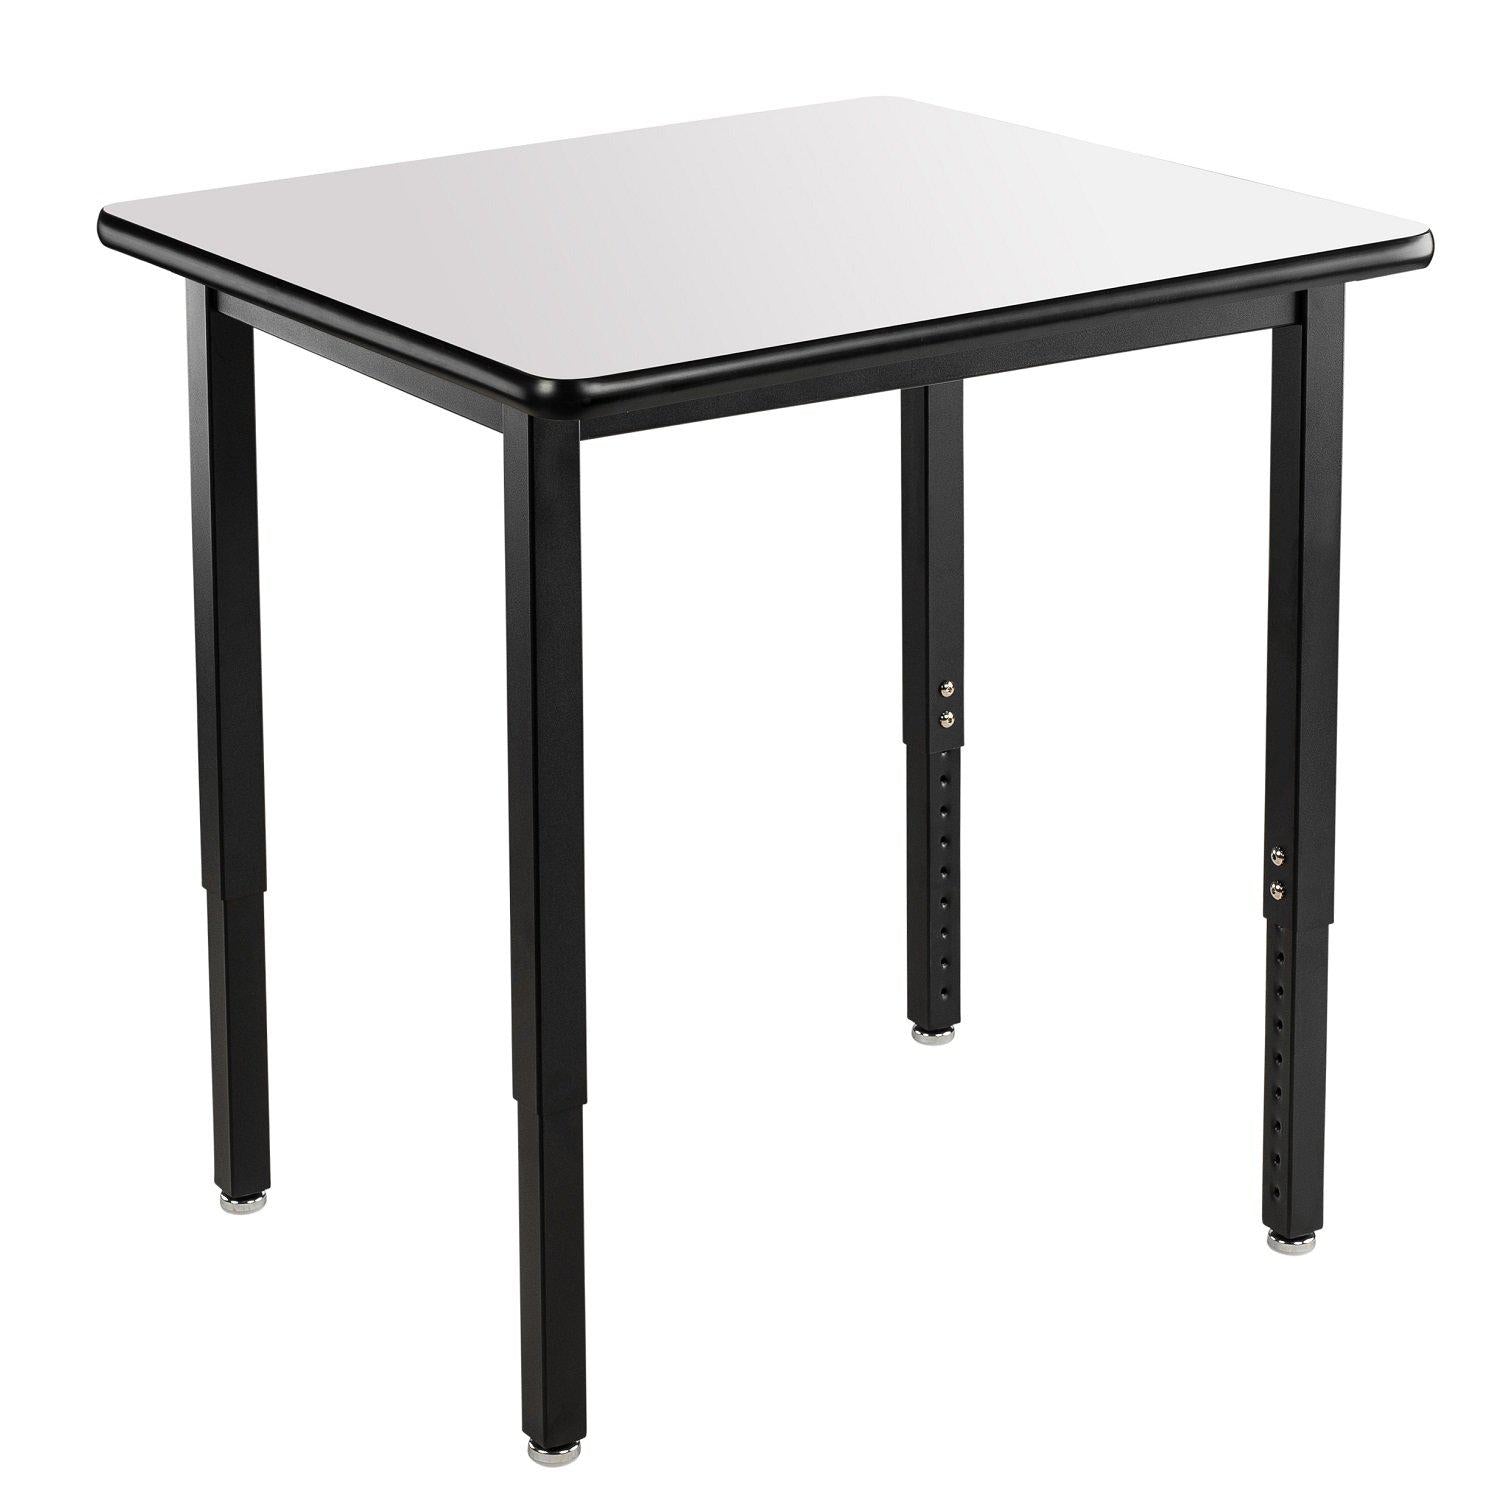 Heavy-Duty Height-Adjustable Utility Table, Black Frame, 30" x 36", Whiteboard High-Pressure Laminate Top